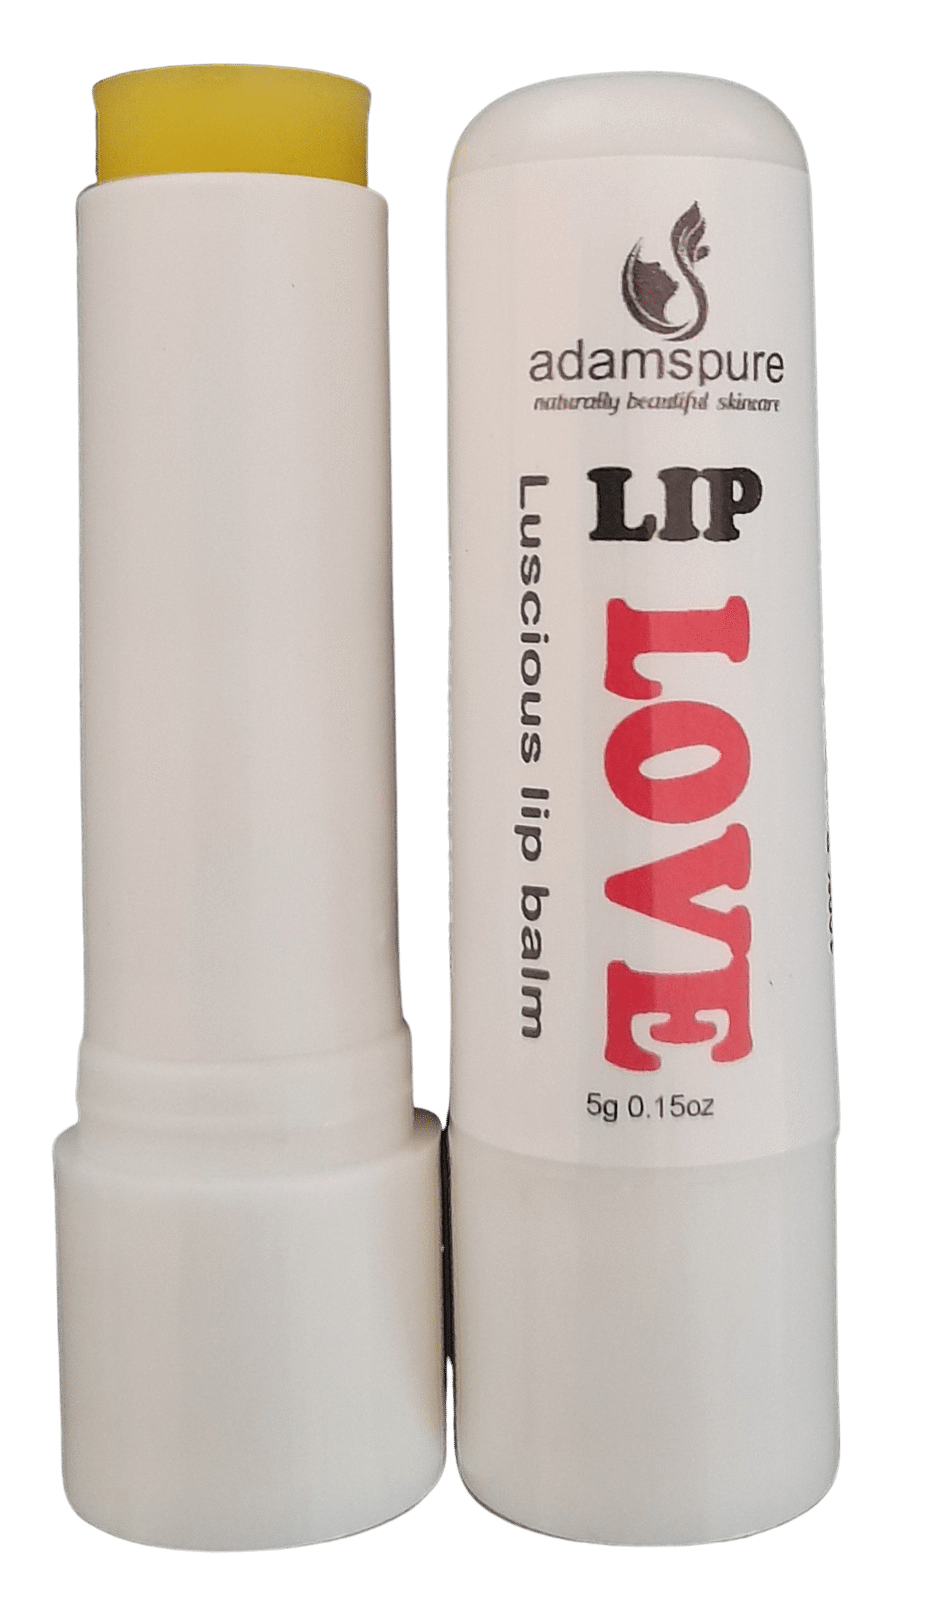 Lip love. The best all natural lip balm. Made in Australia all natural ingredients. 